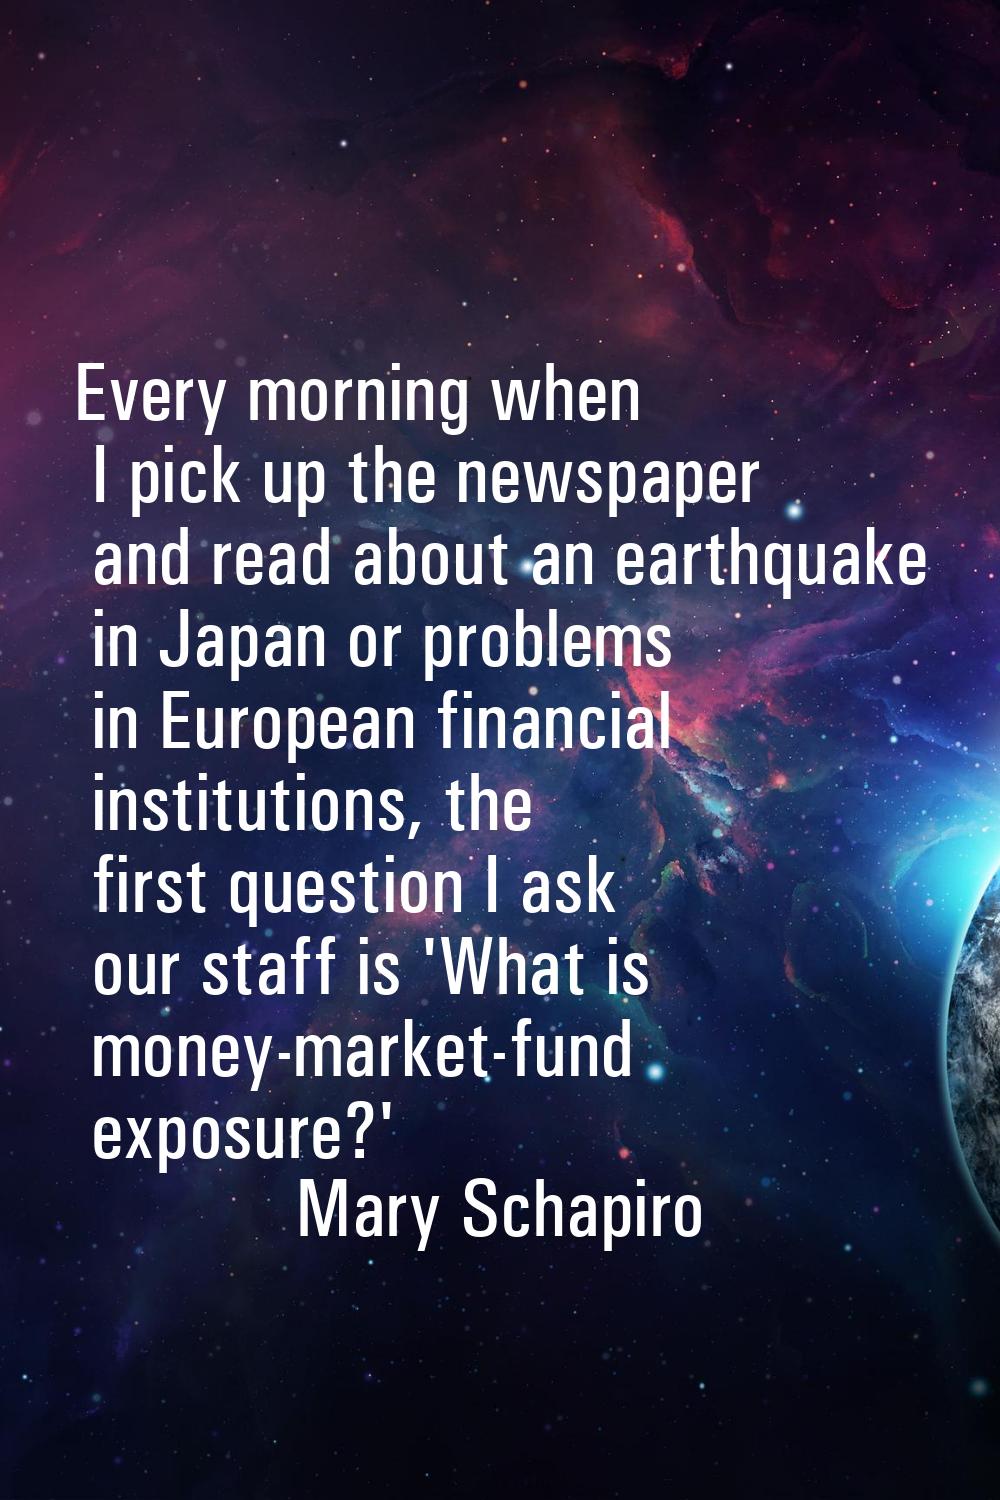 Every morning when I pick up the newspaper and read about an earthquake in Japan or problems in Eur